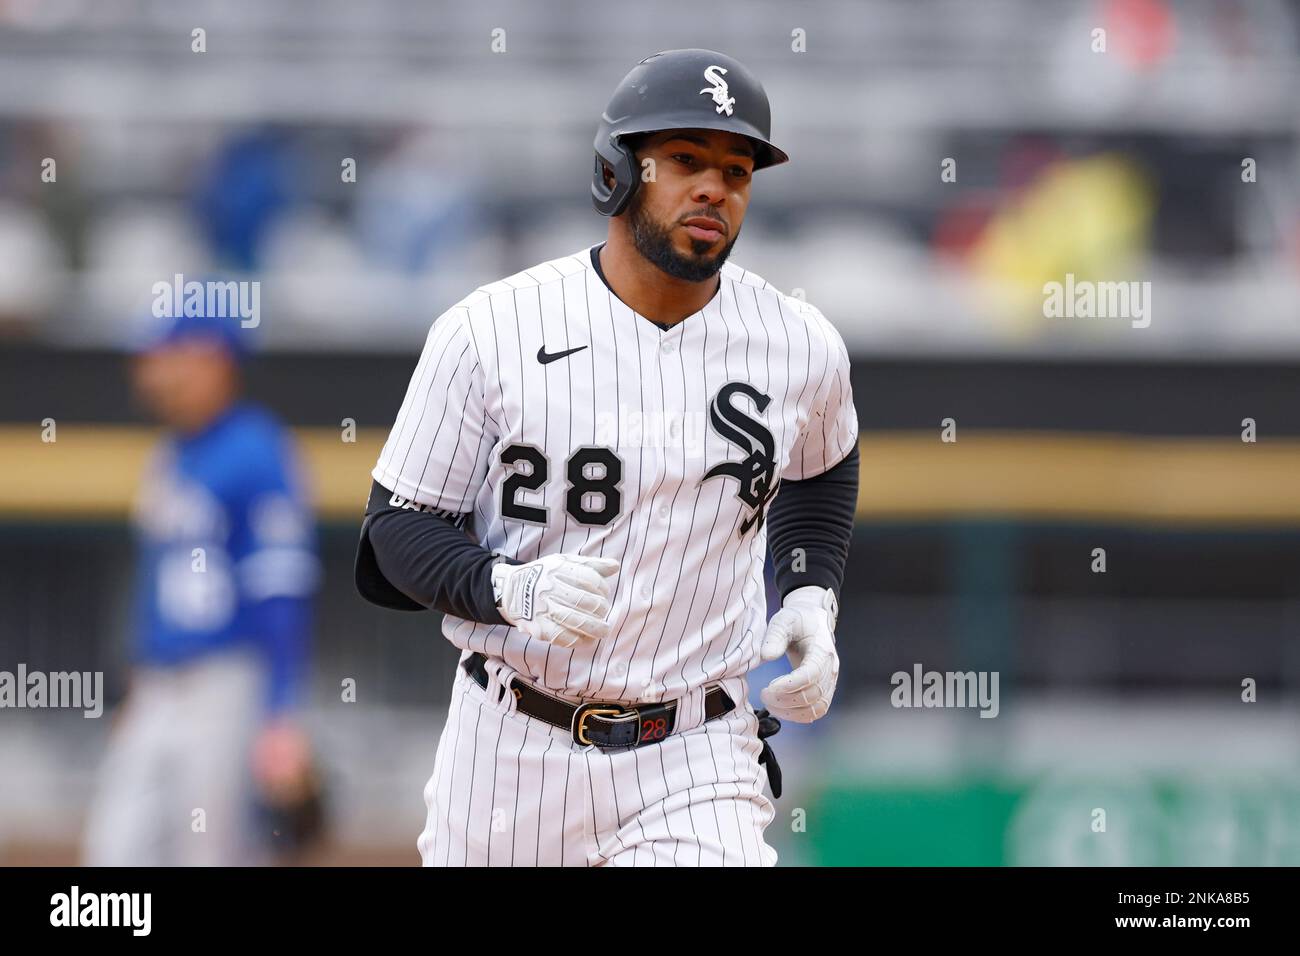 CHICAGO, IL - APRIL 28: Chicago White Sox second baseman Leury Garcia (28)  rounds the bases after a solo homerun in the sixth inning of an MLB game  against the Kansas City